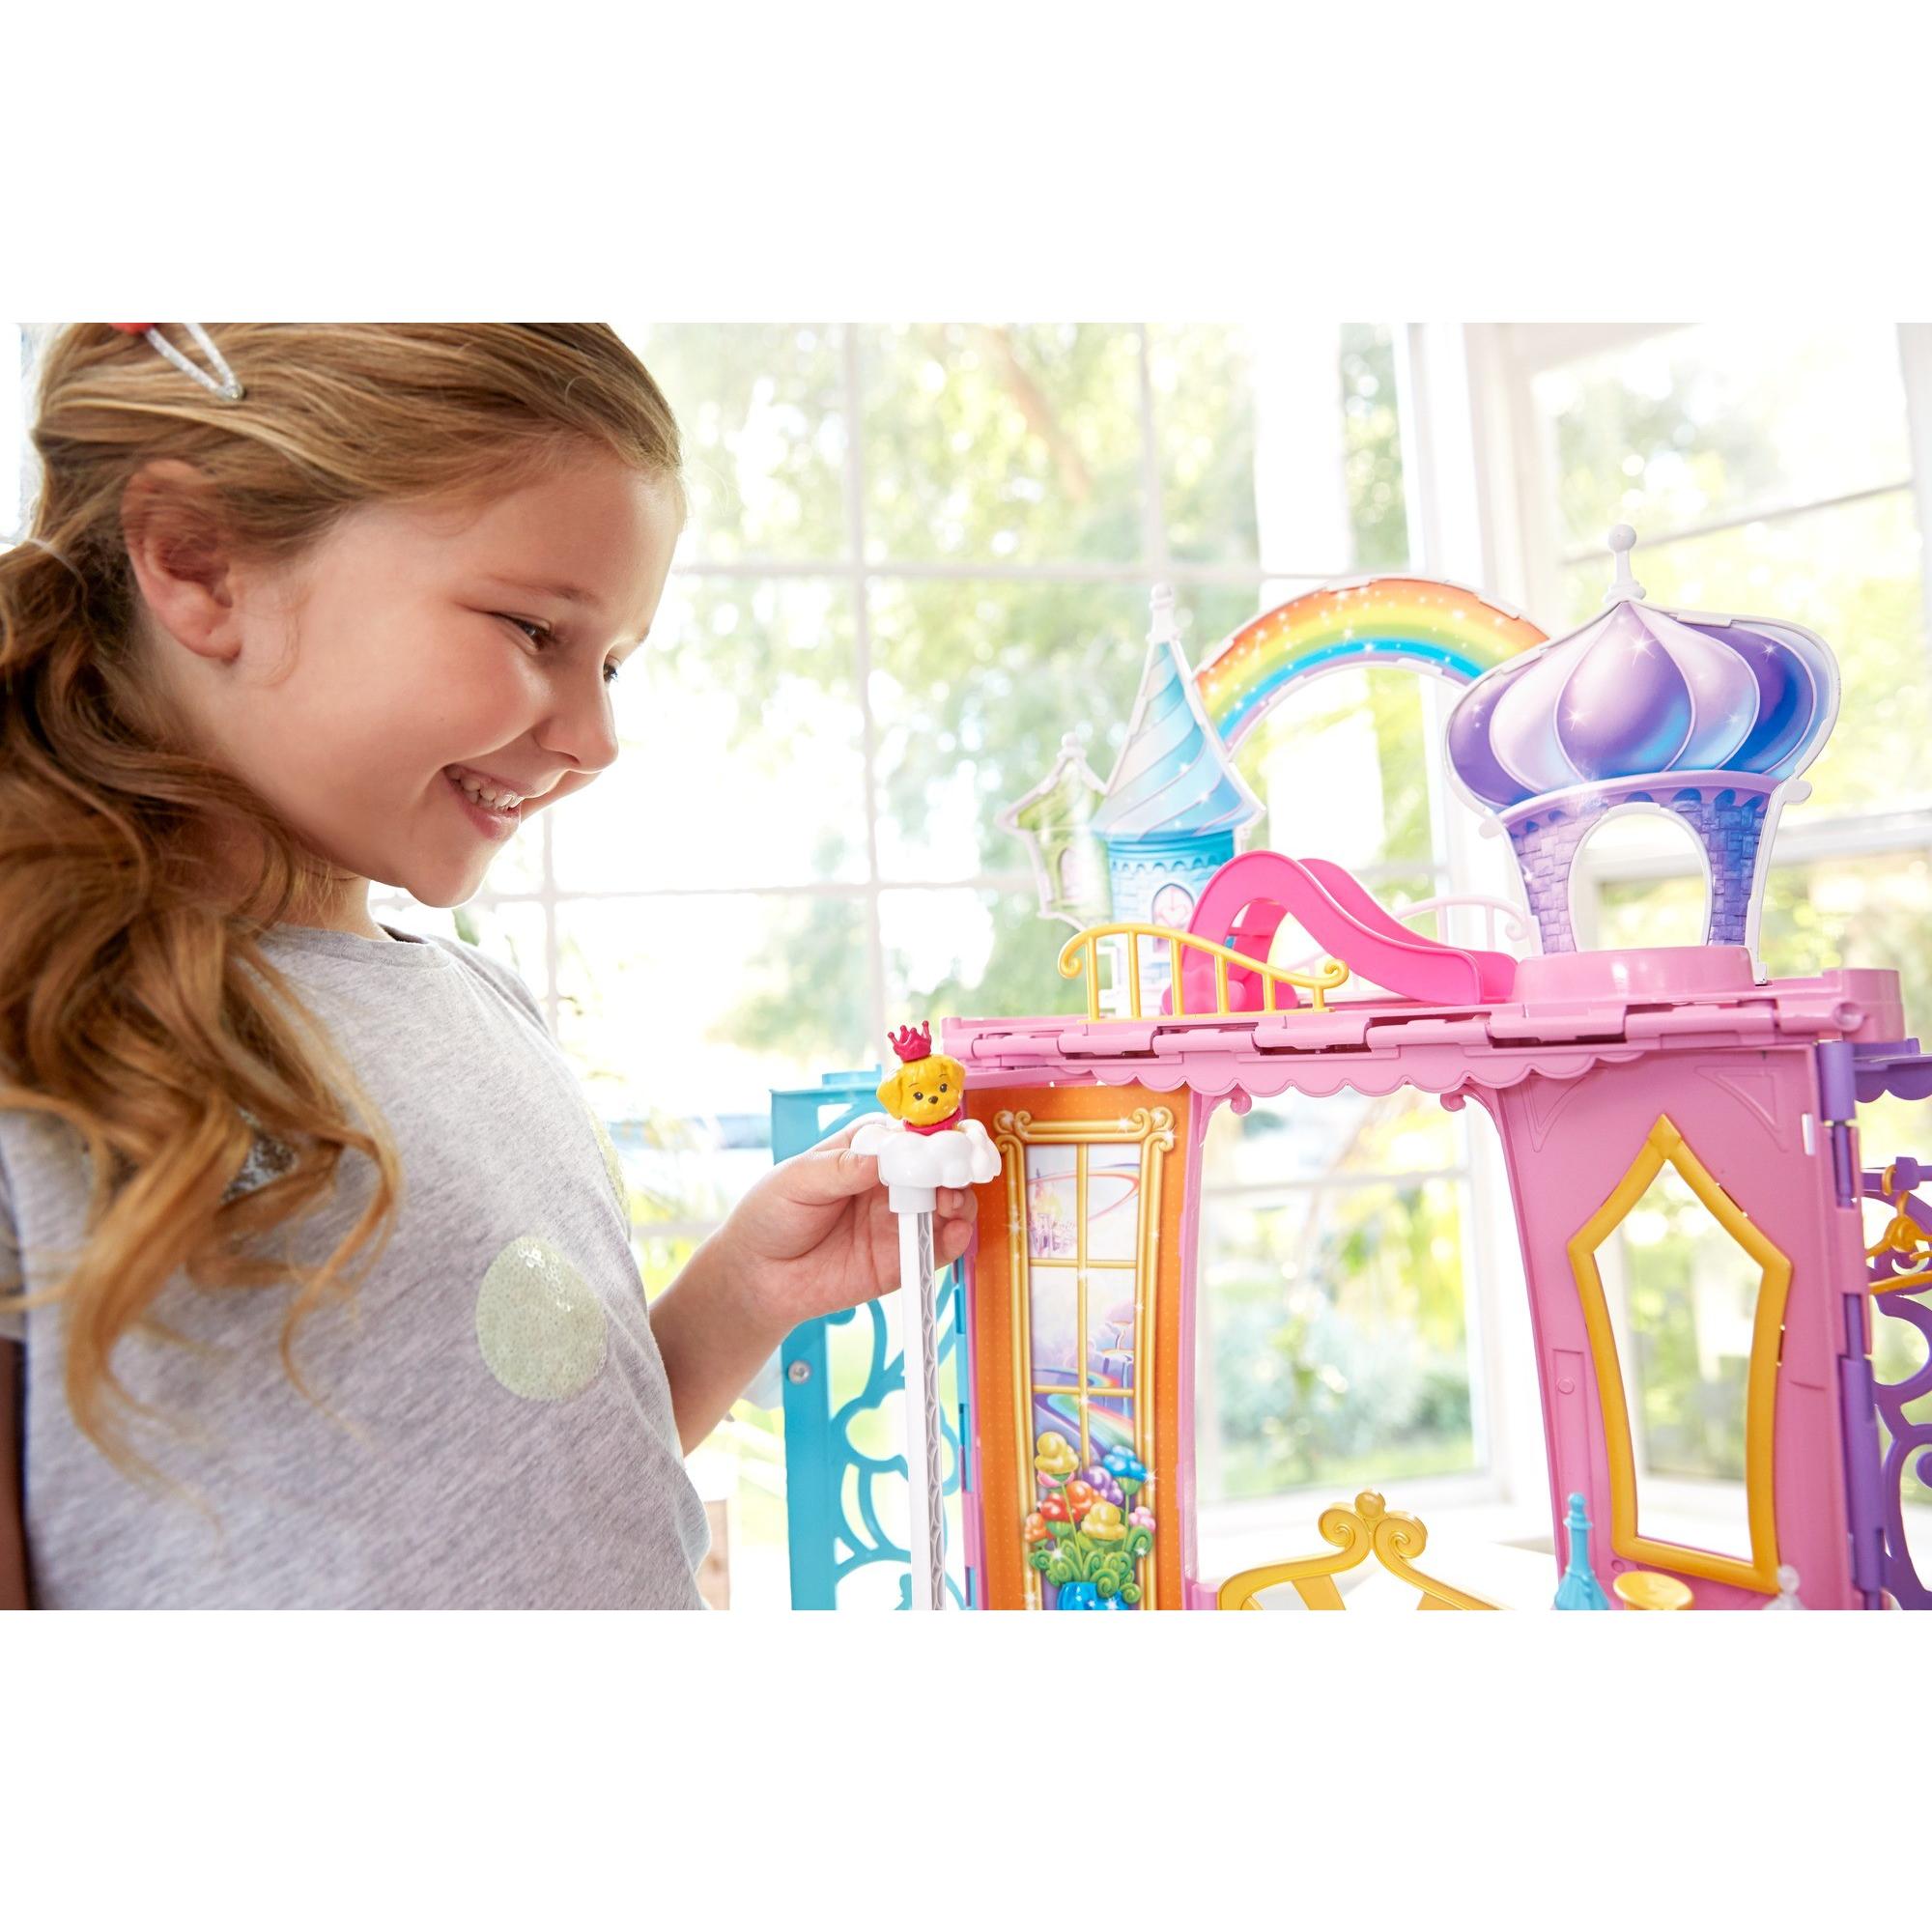 Barbie Dreamtopia Castle Portable Playset with Transforming Features - image 3 of 22